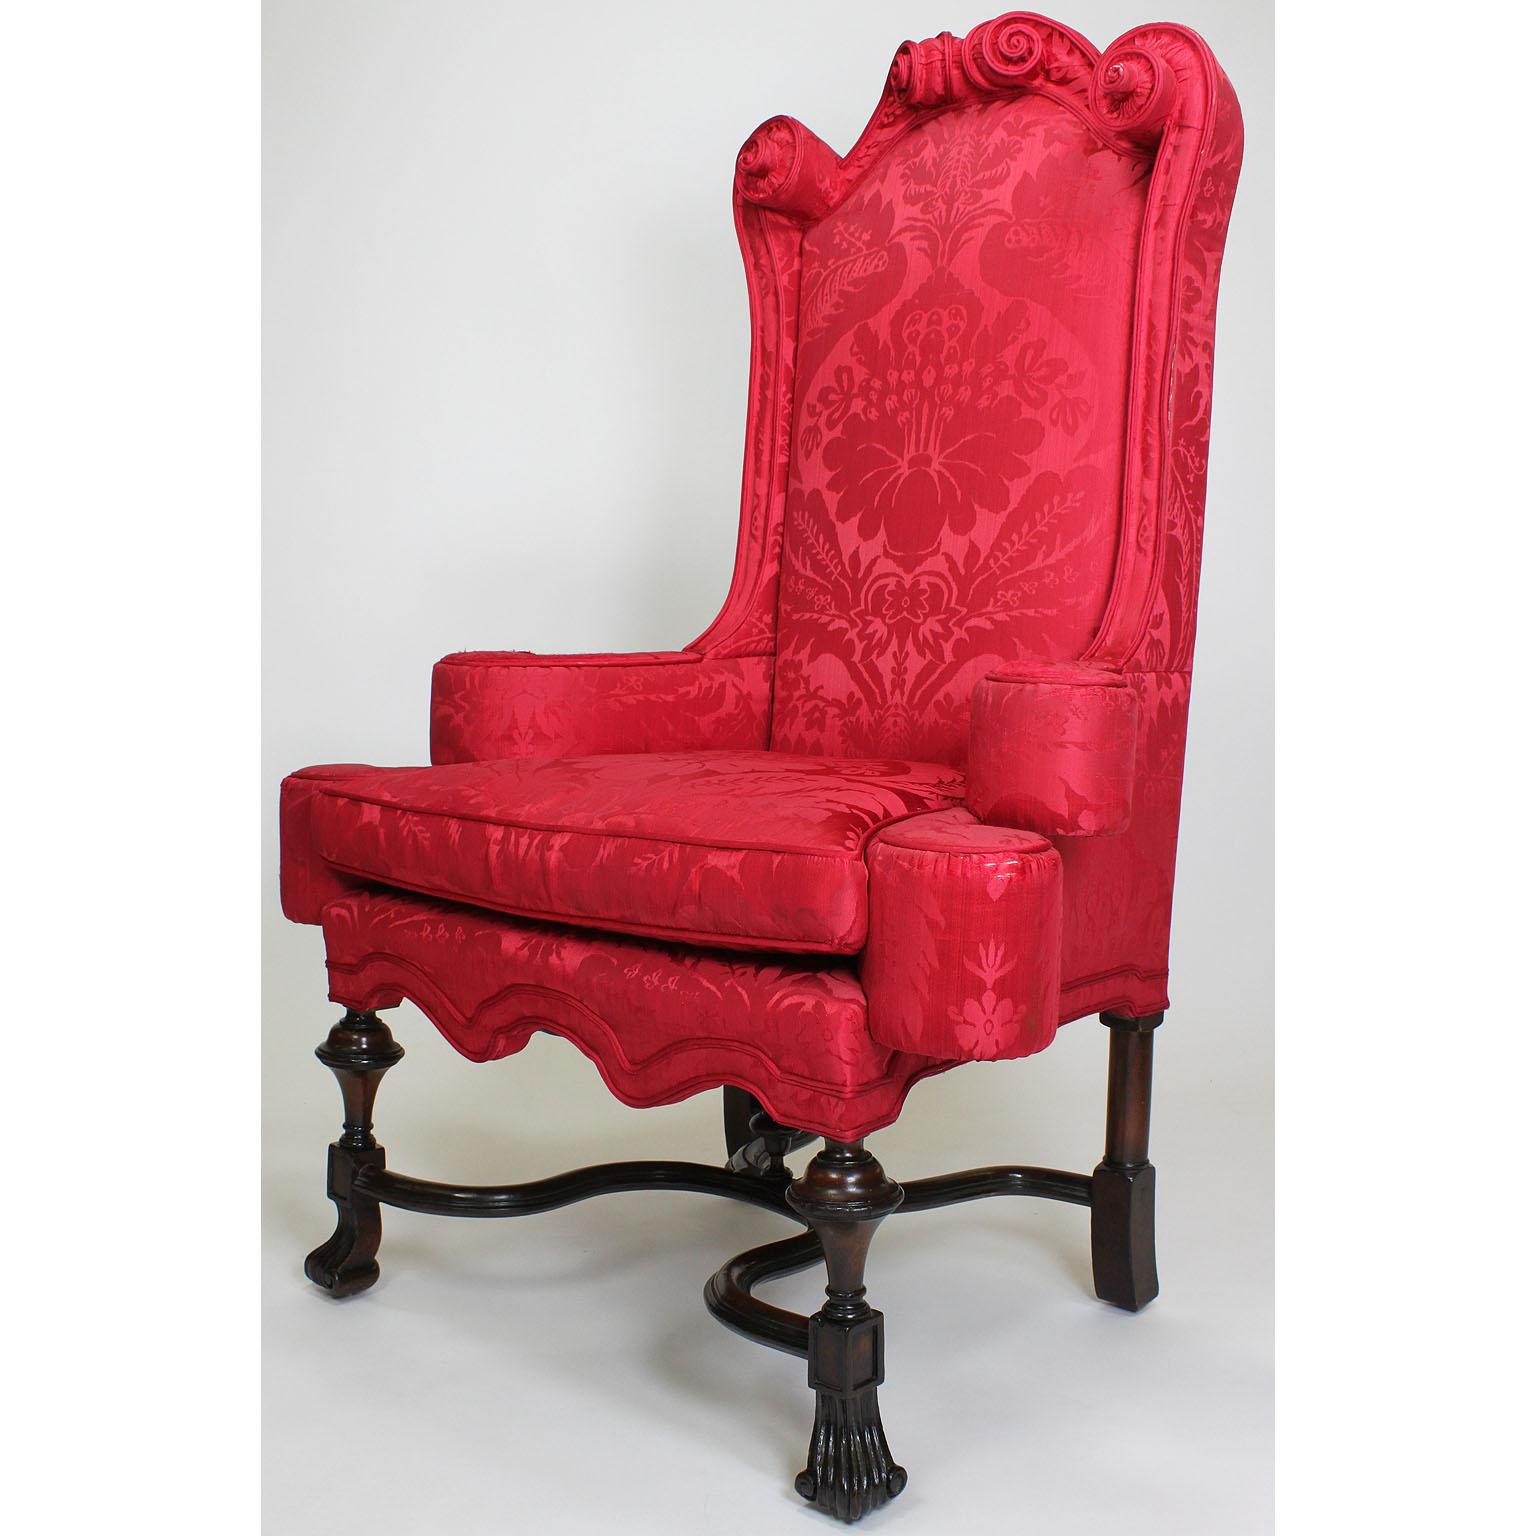 A fine and rare pair of English 19th century William & Mary style mahogany and silk-upholstered armchairs. The high-back frames with scrolled upholstered corners, rounded armrests with side bumpers all raised on our legs conjoined with a scrolled